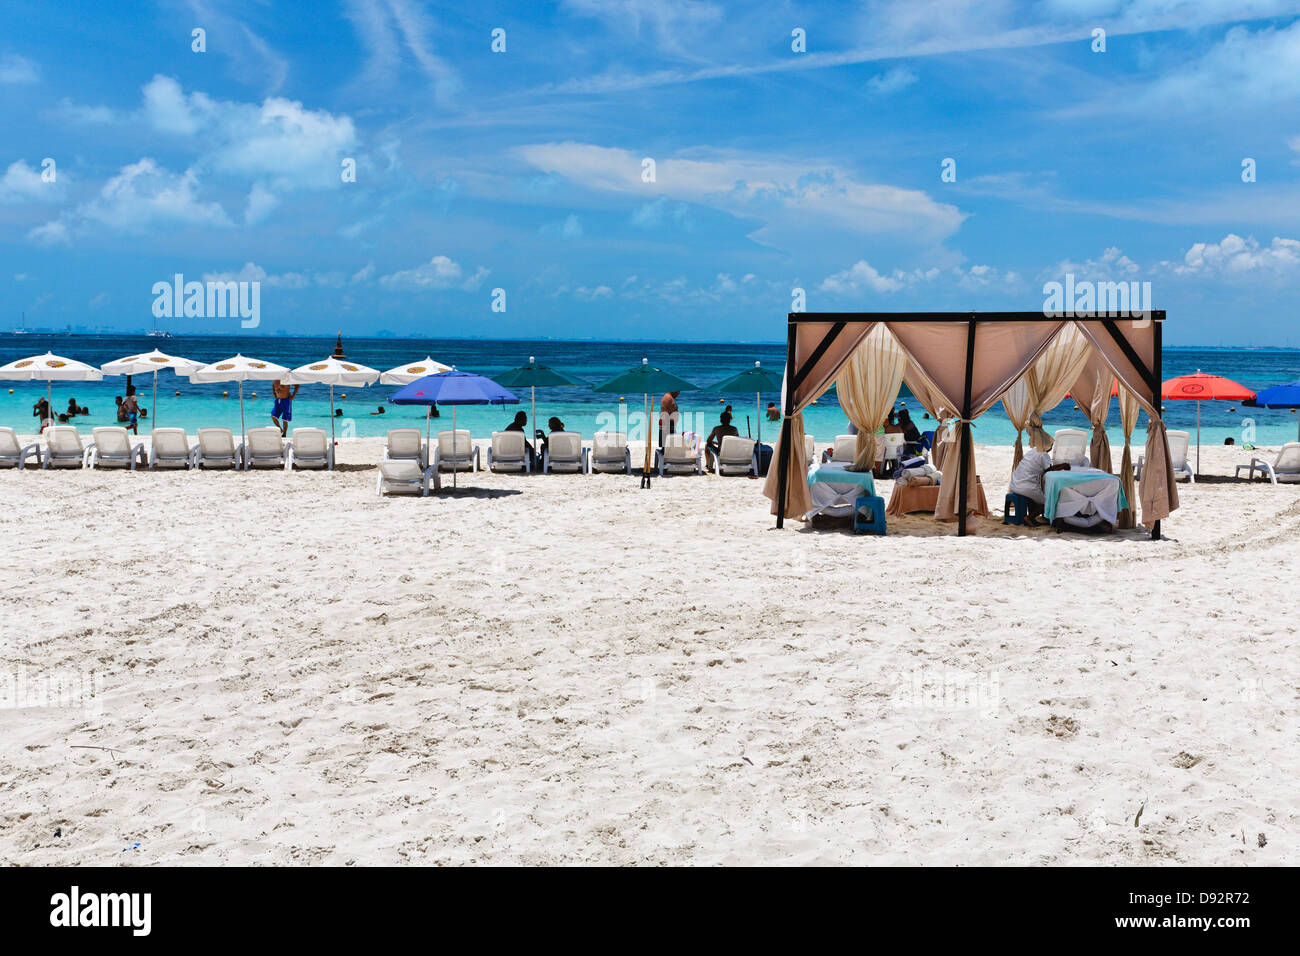 Massage Booths Lounge Chairs and Umbrellas on Playa Norte, Isla Mujeres, Mexico Stock Photo